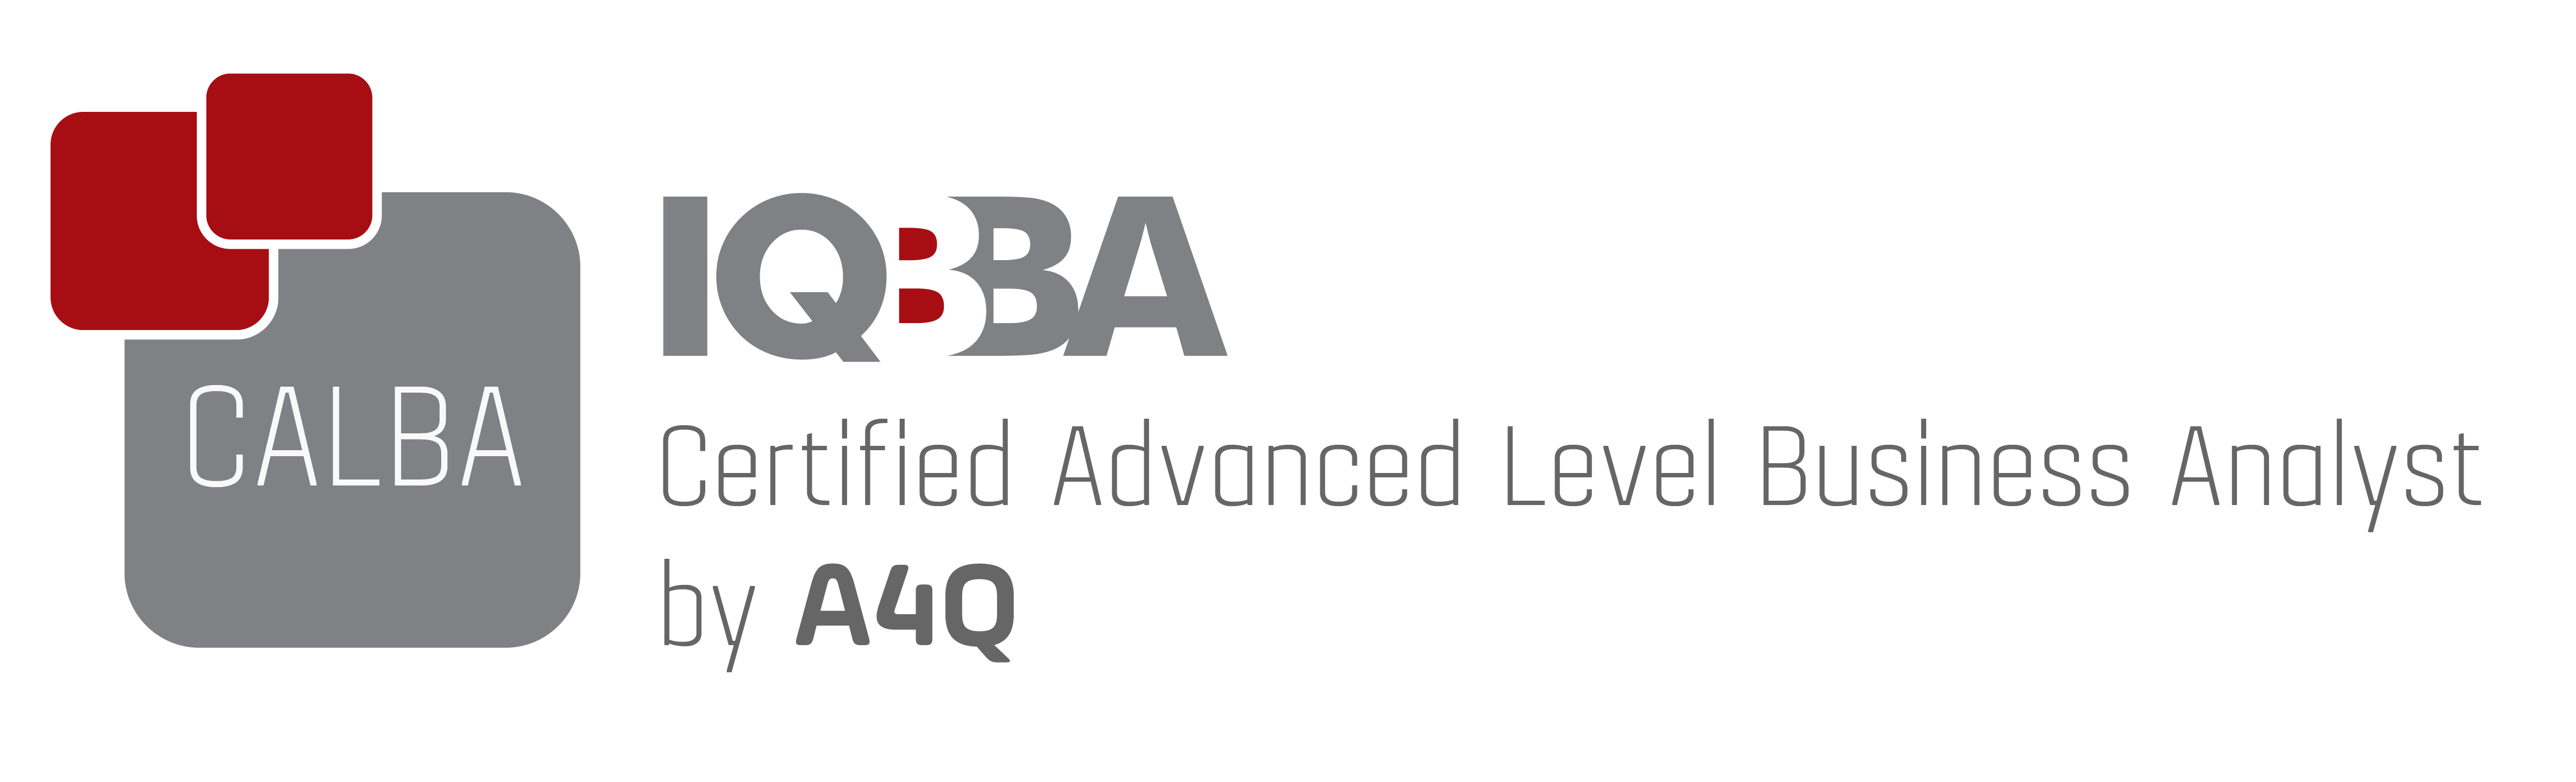 IQBBA Certified Advanced Level Business Analyst